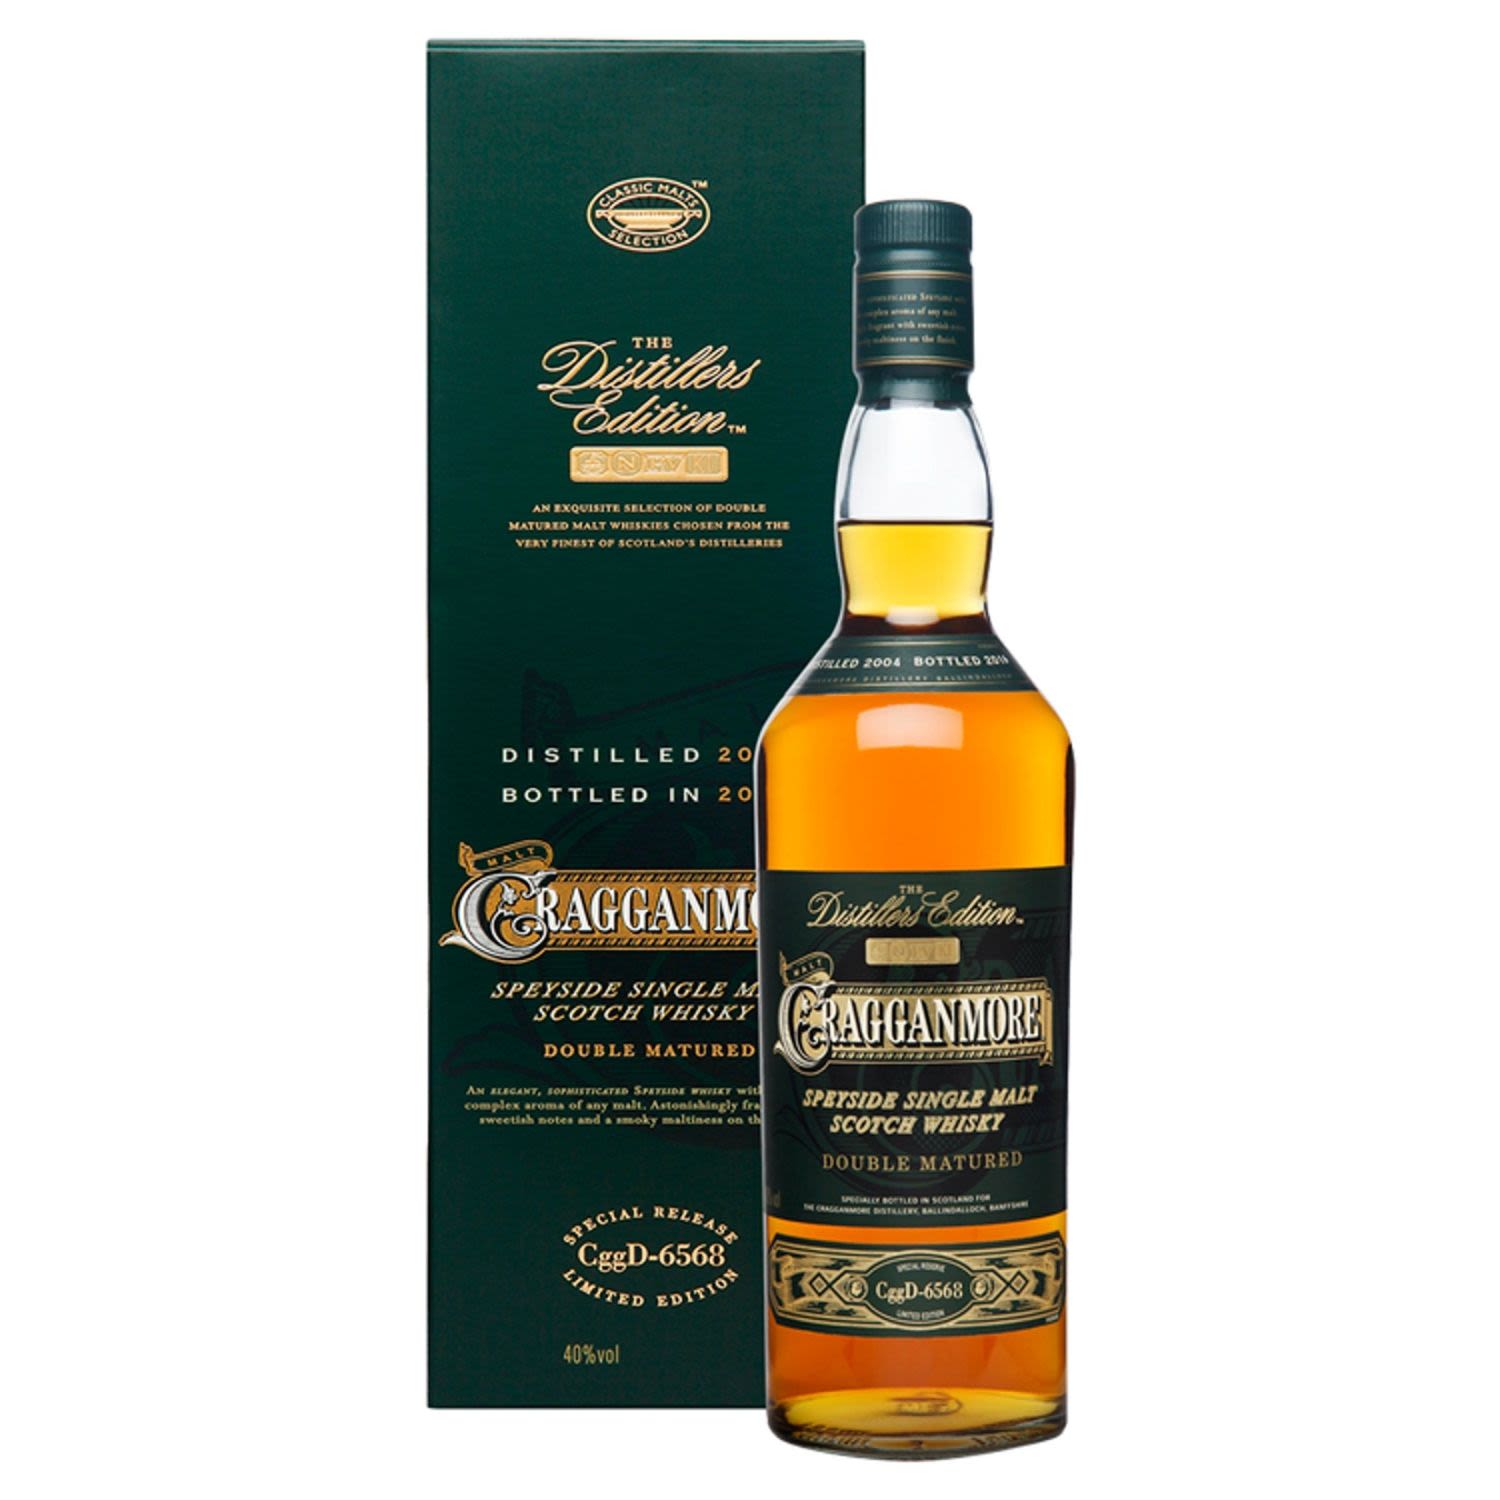 The complexity of Cragganmore makes it an out-of-the-ordinary choice for a second cask finish. However, port-wine casks provide the perfectly harmonious partner. Sweet, intensely fruity fragrances and a deep oak-smoked malty taste, then a longish drying finish with plenty of oak character showing through.<br /> <br />Alcohol Volume: 40.00%<br /><br />Pack Format: Bottle<br /><br />Standard Drinks: 22.1</br /><br />Pack Type: Bottle<br /><br />Country of Origin: Scotland<br />